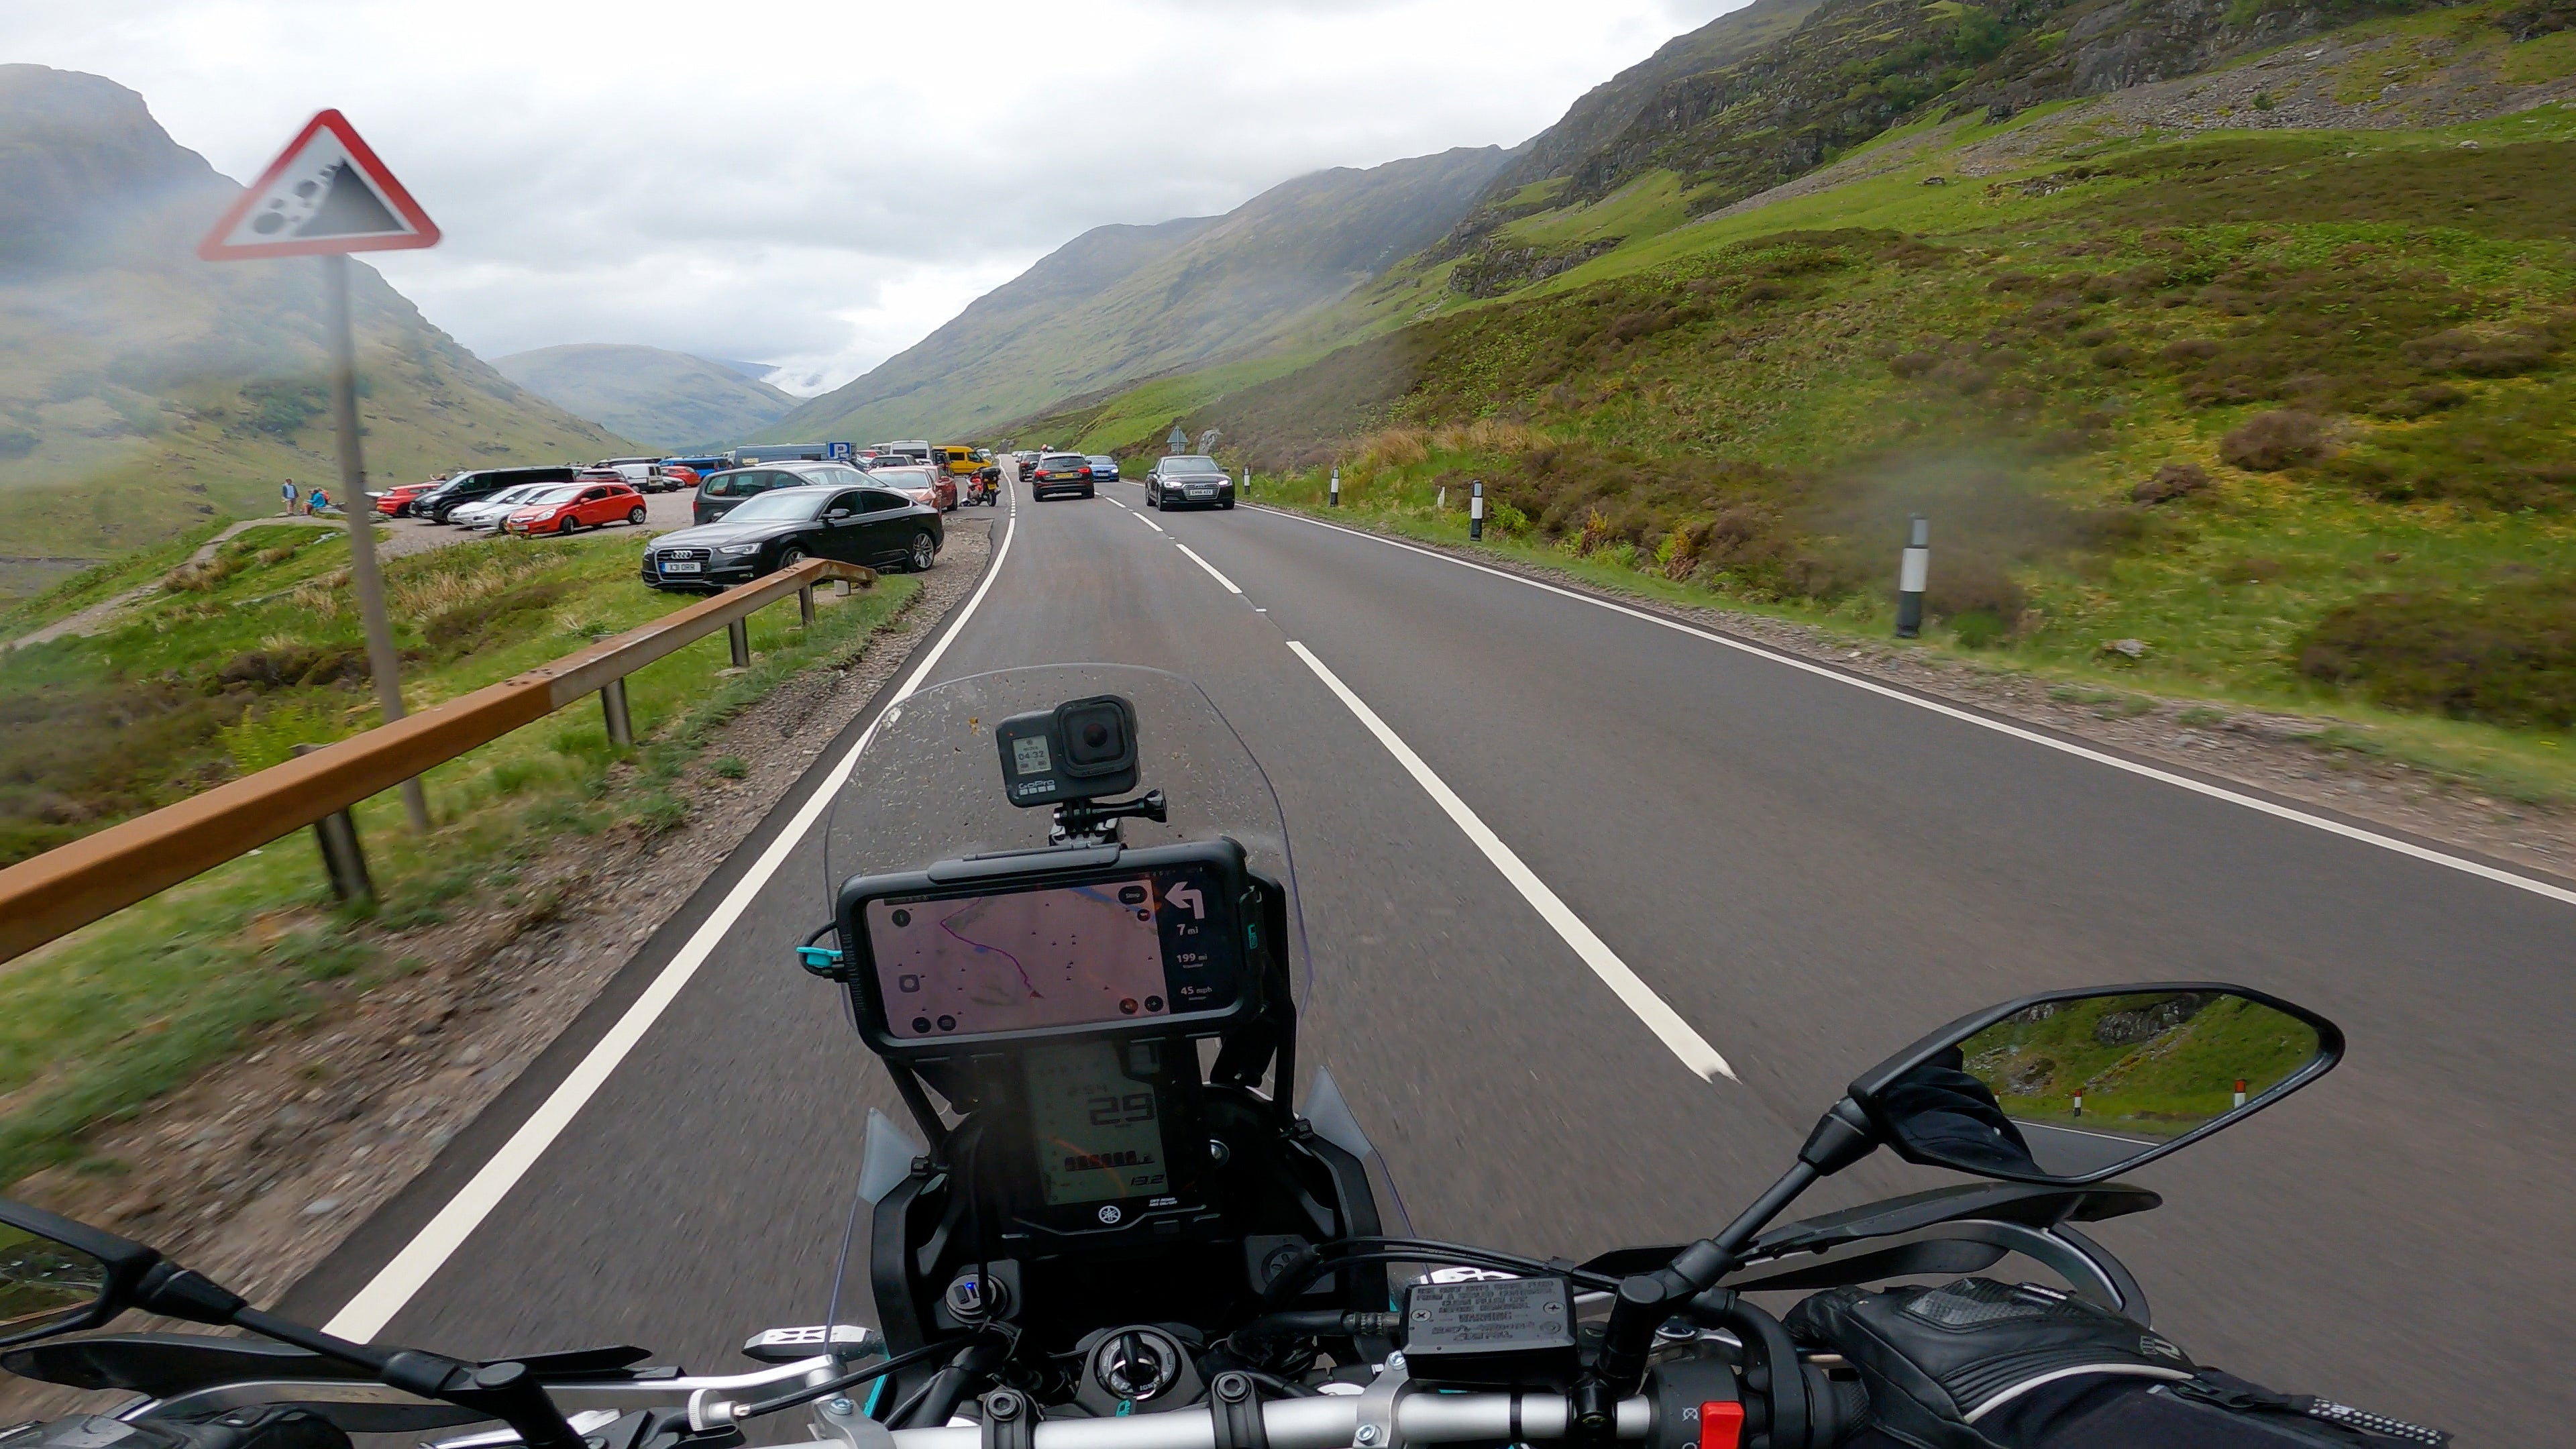 Glen Coe Motorcycle Touring, busy with cars.